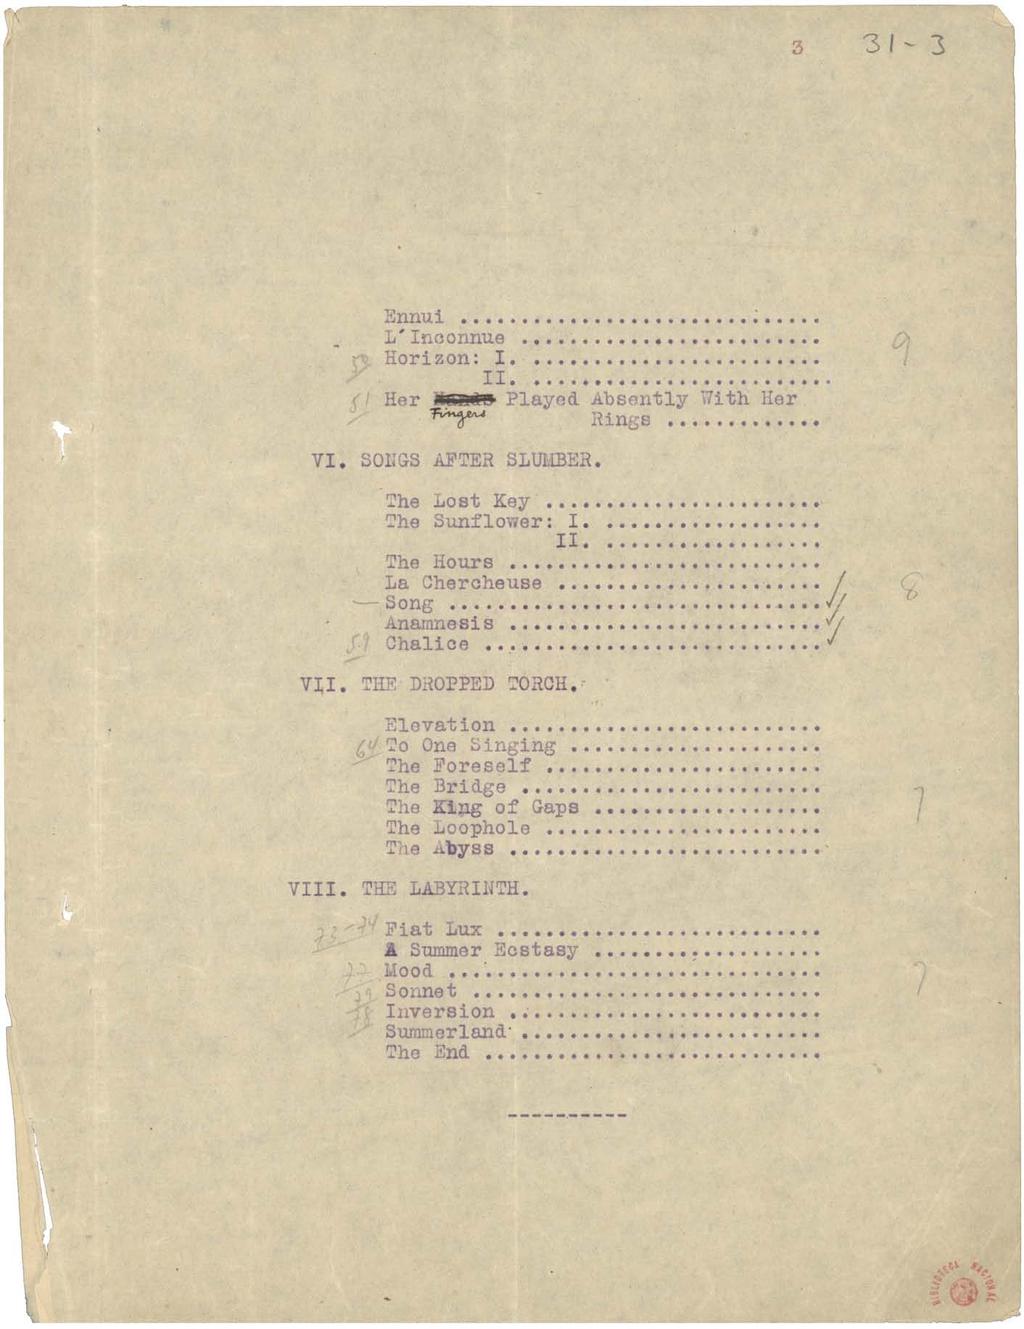 Fig. 14. Typescript of Contents of The Mad Fiddler. (BNP / E3, 31-3) Numerous other changes to typescript 31 have been made, both in typing and by hand.